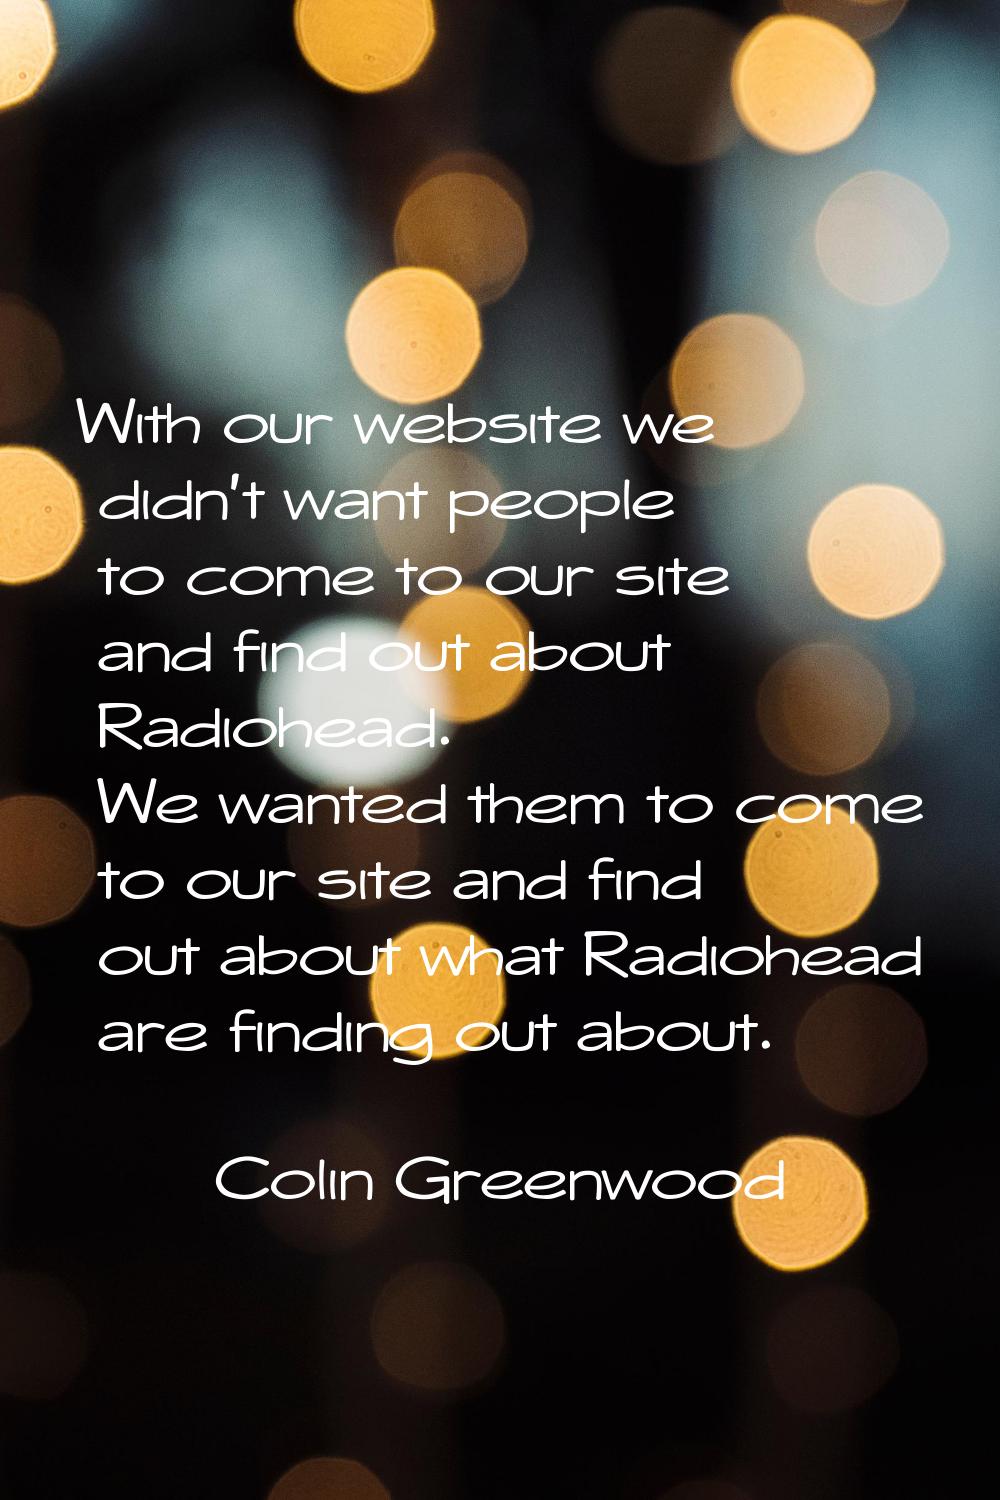 With our website we didn't want people to come to our site and find out about Radiohead. We wanted 